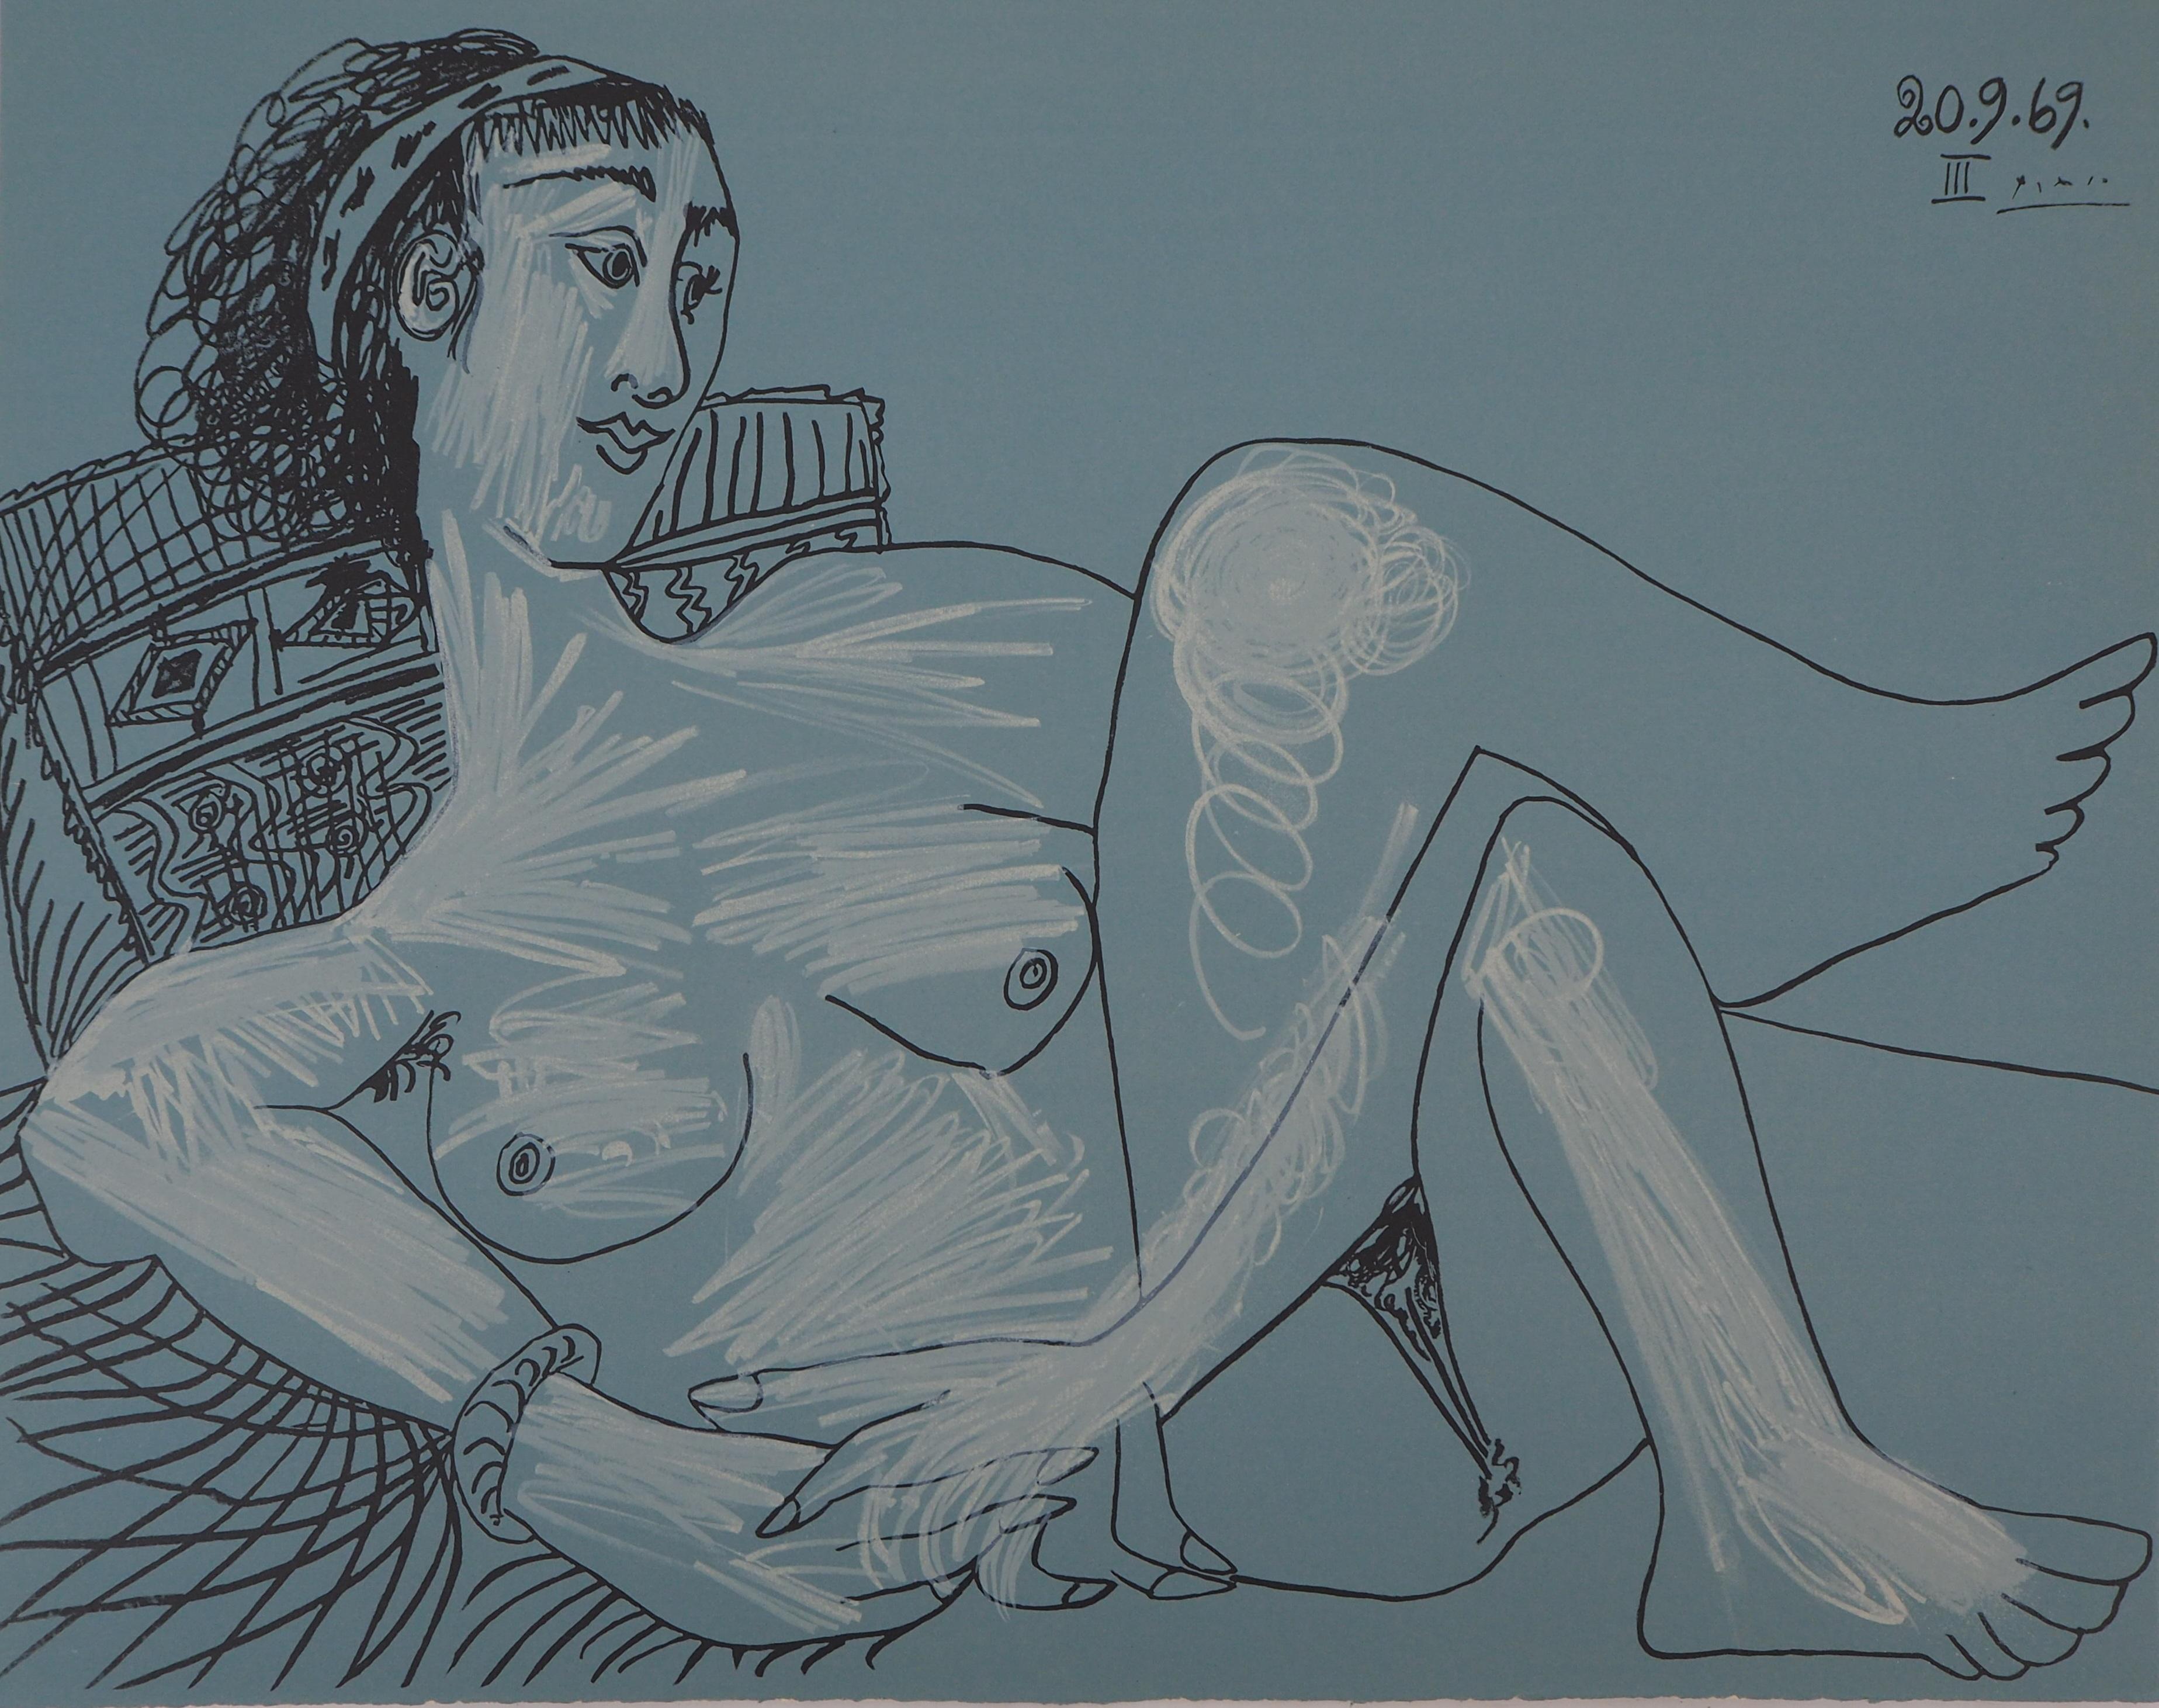 Seated Nude - Lithograph (Mourlot 1971) - Cubist Print by (after) Pablo Picasso